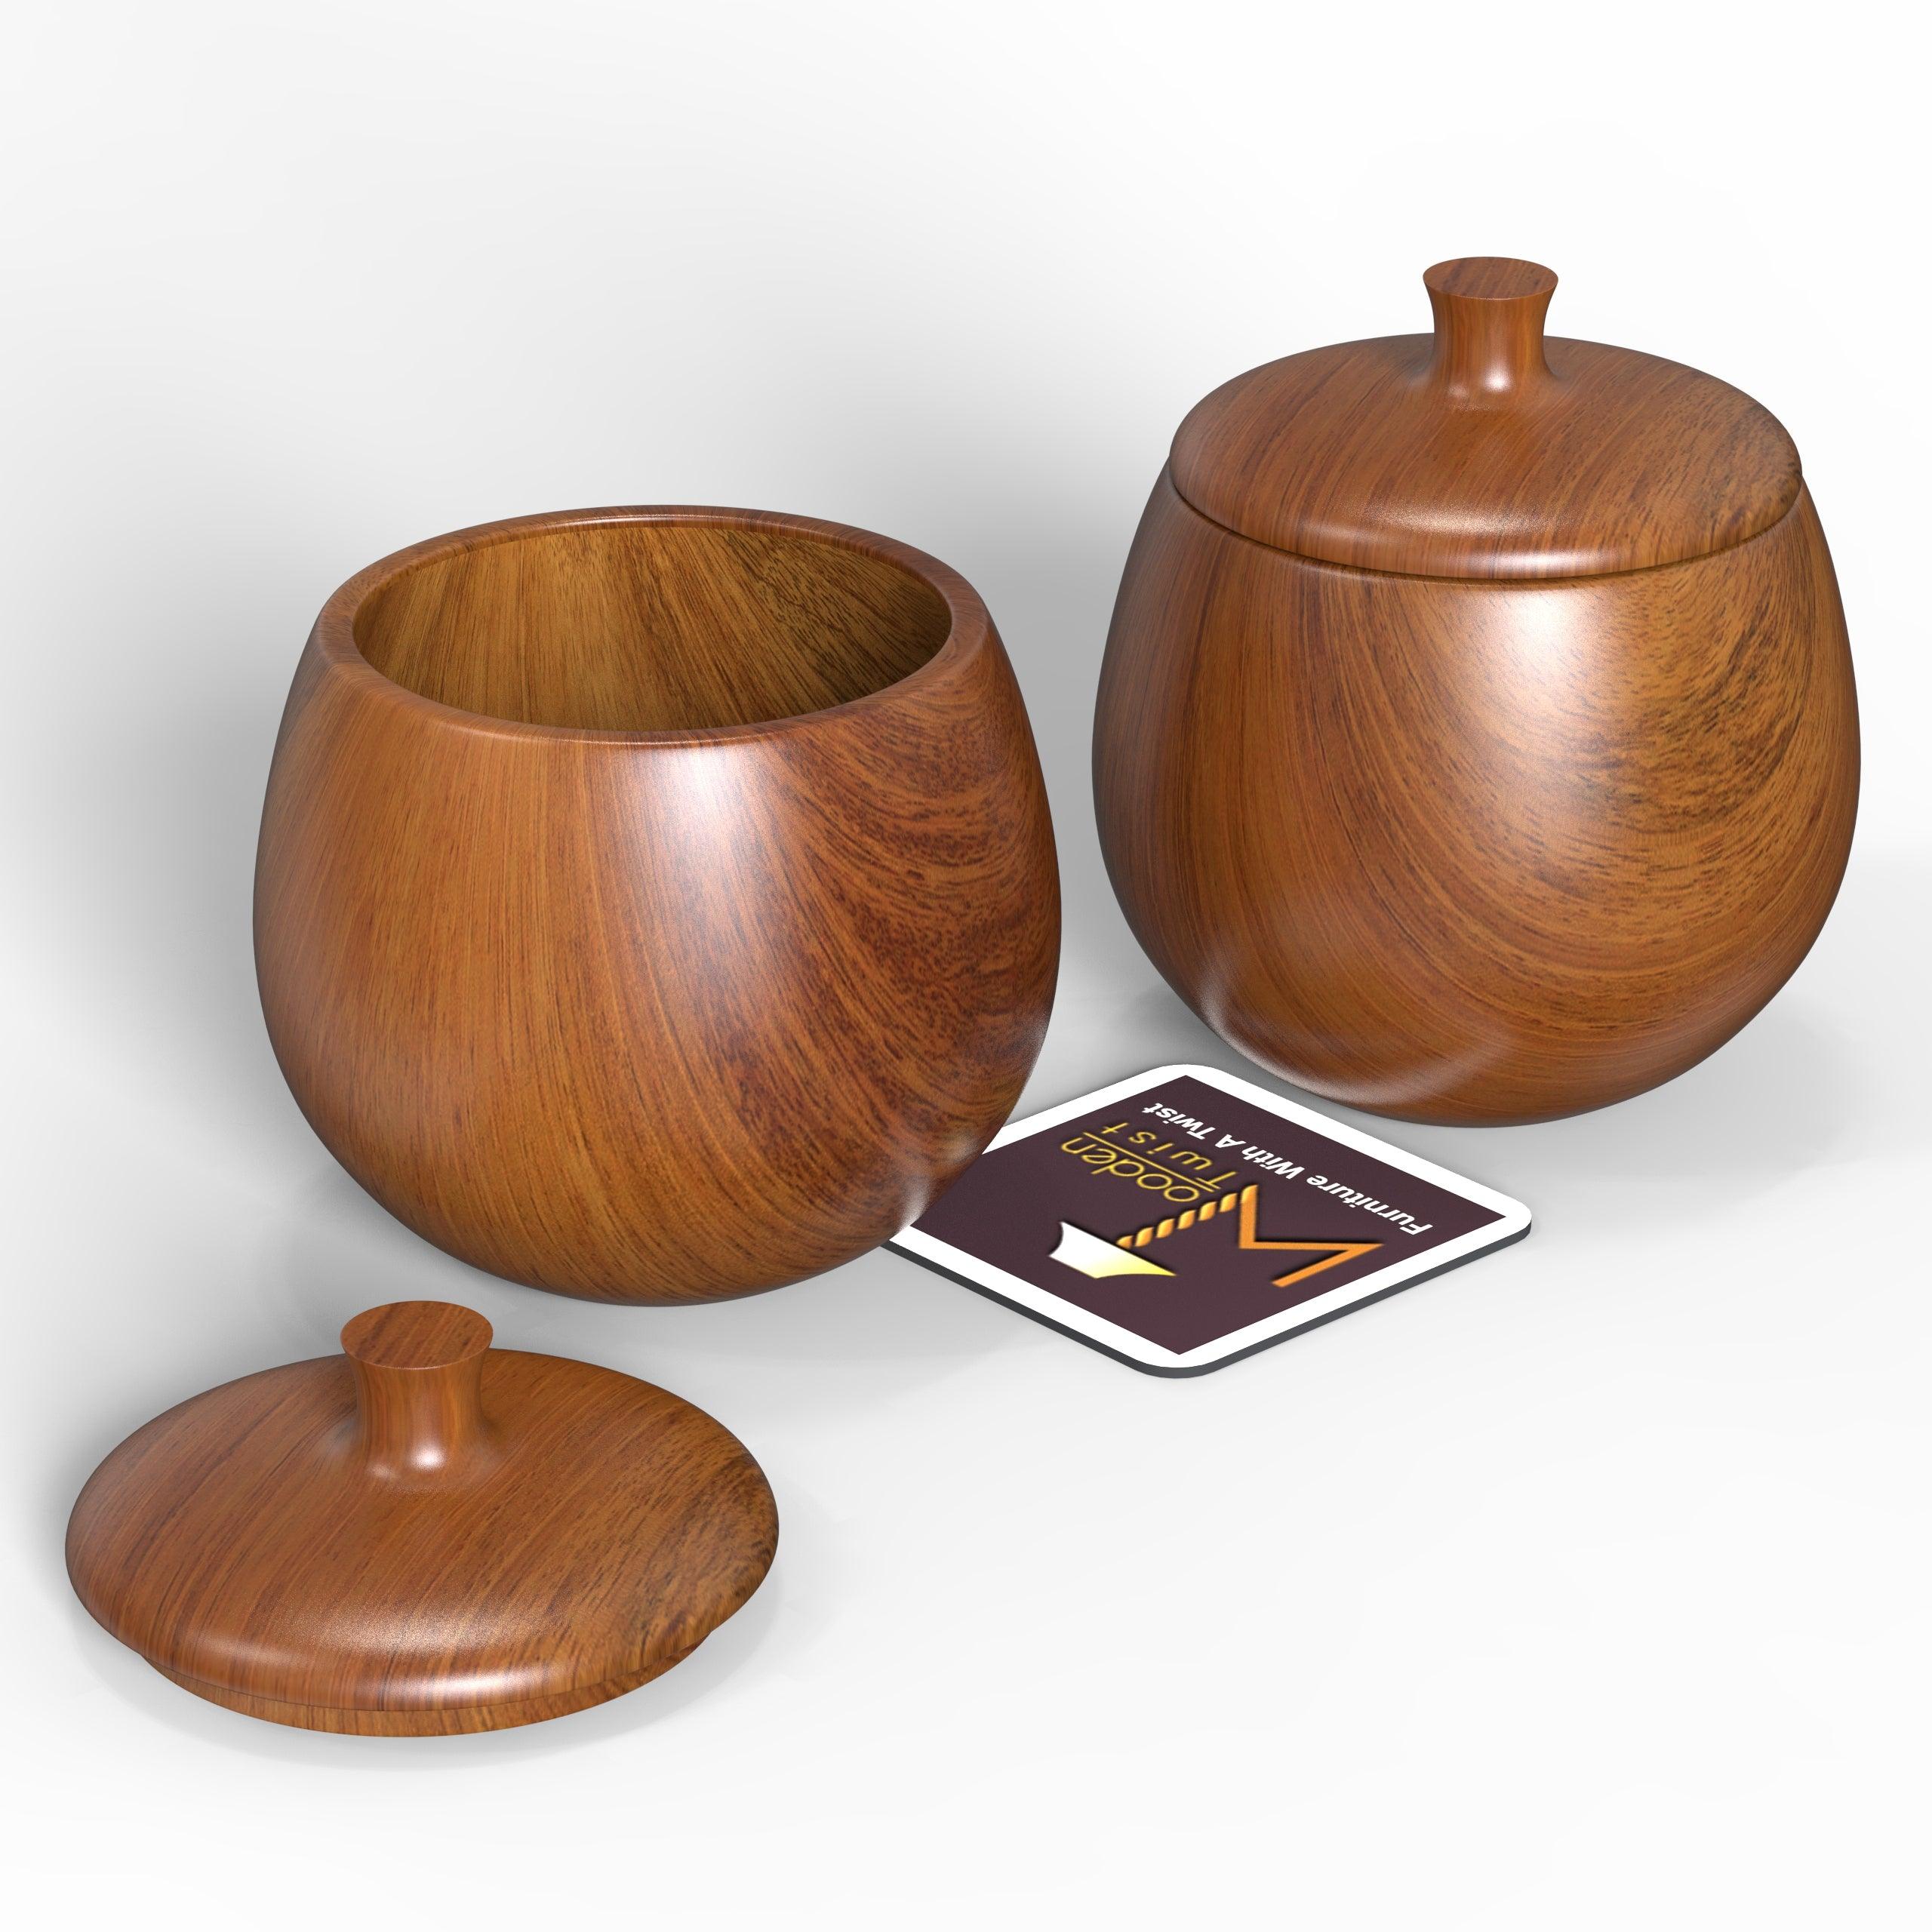 Buy Wooden Tea Coffee & Sugar Container Online at woodentwist